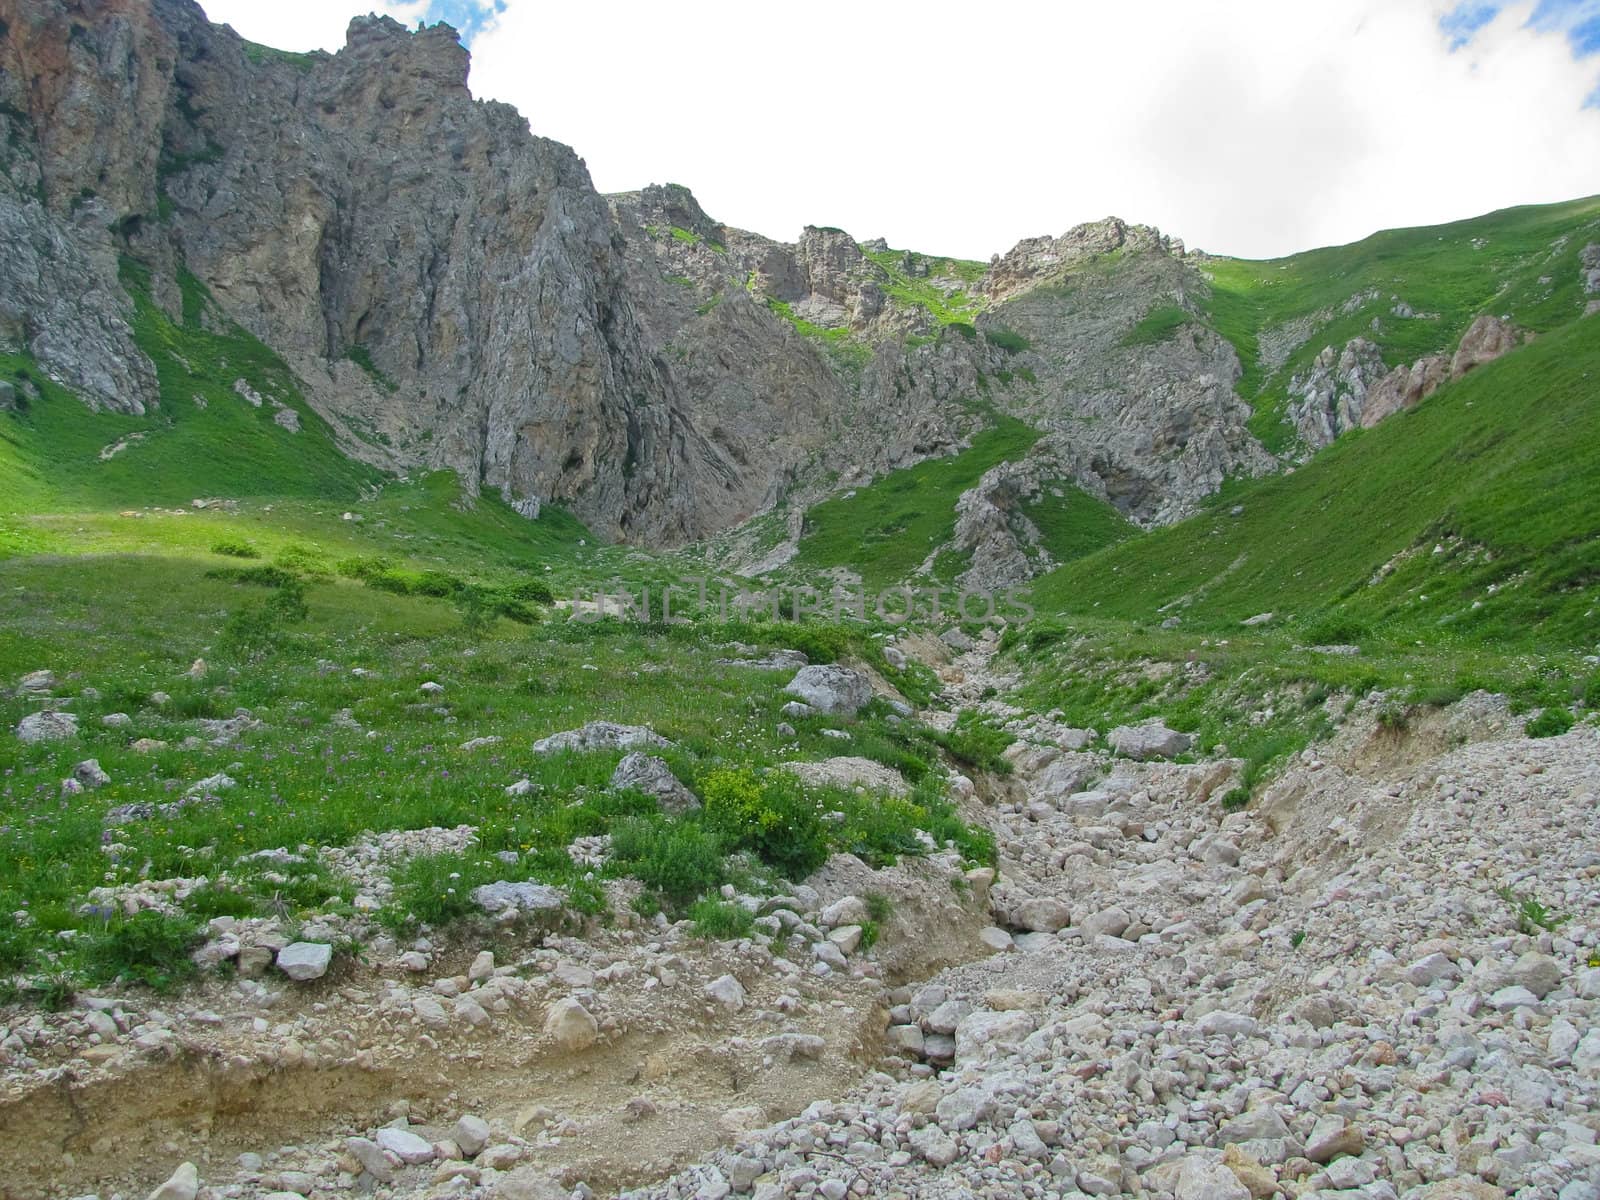 The magnificent mountain scenery of the Caucasus Nature Reserve by Viktoha